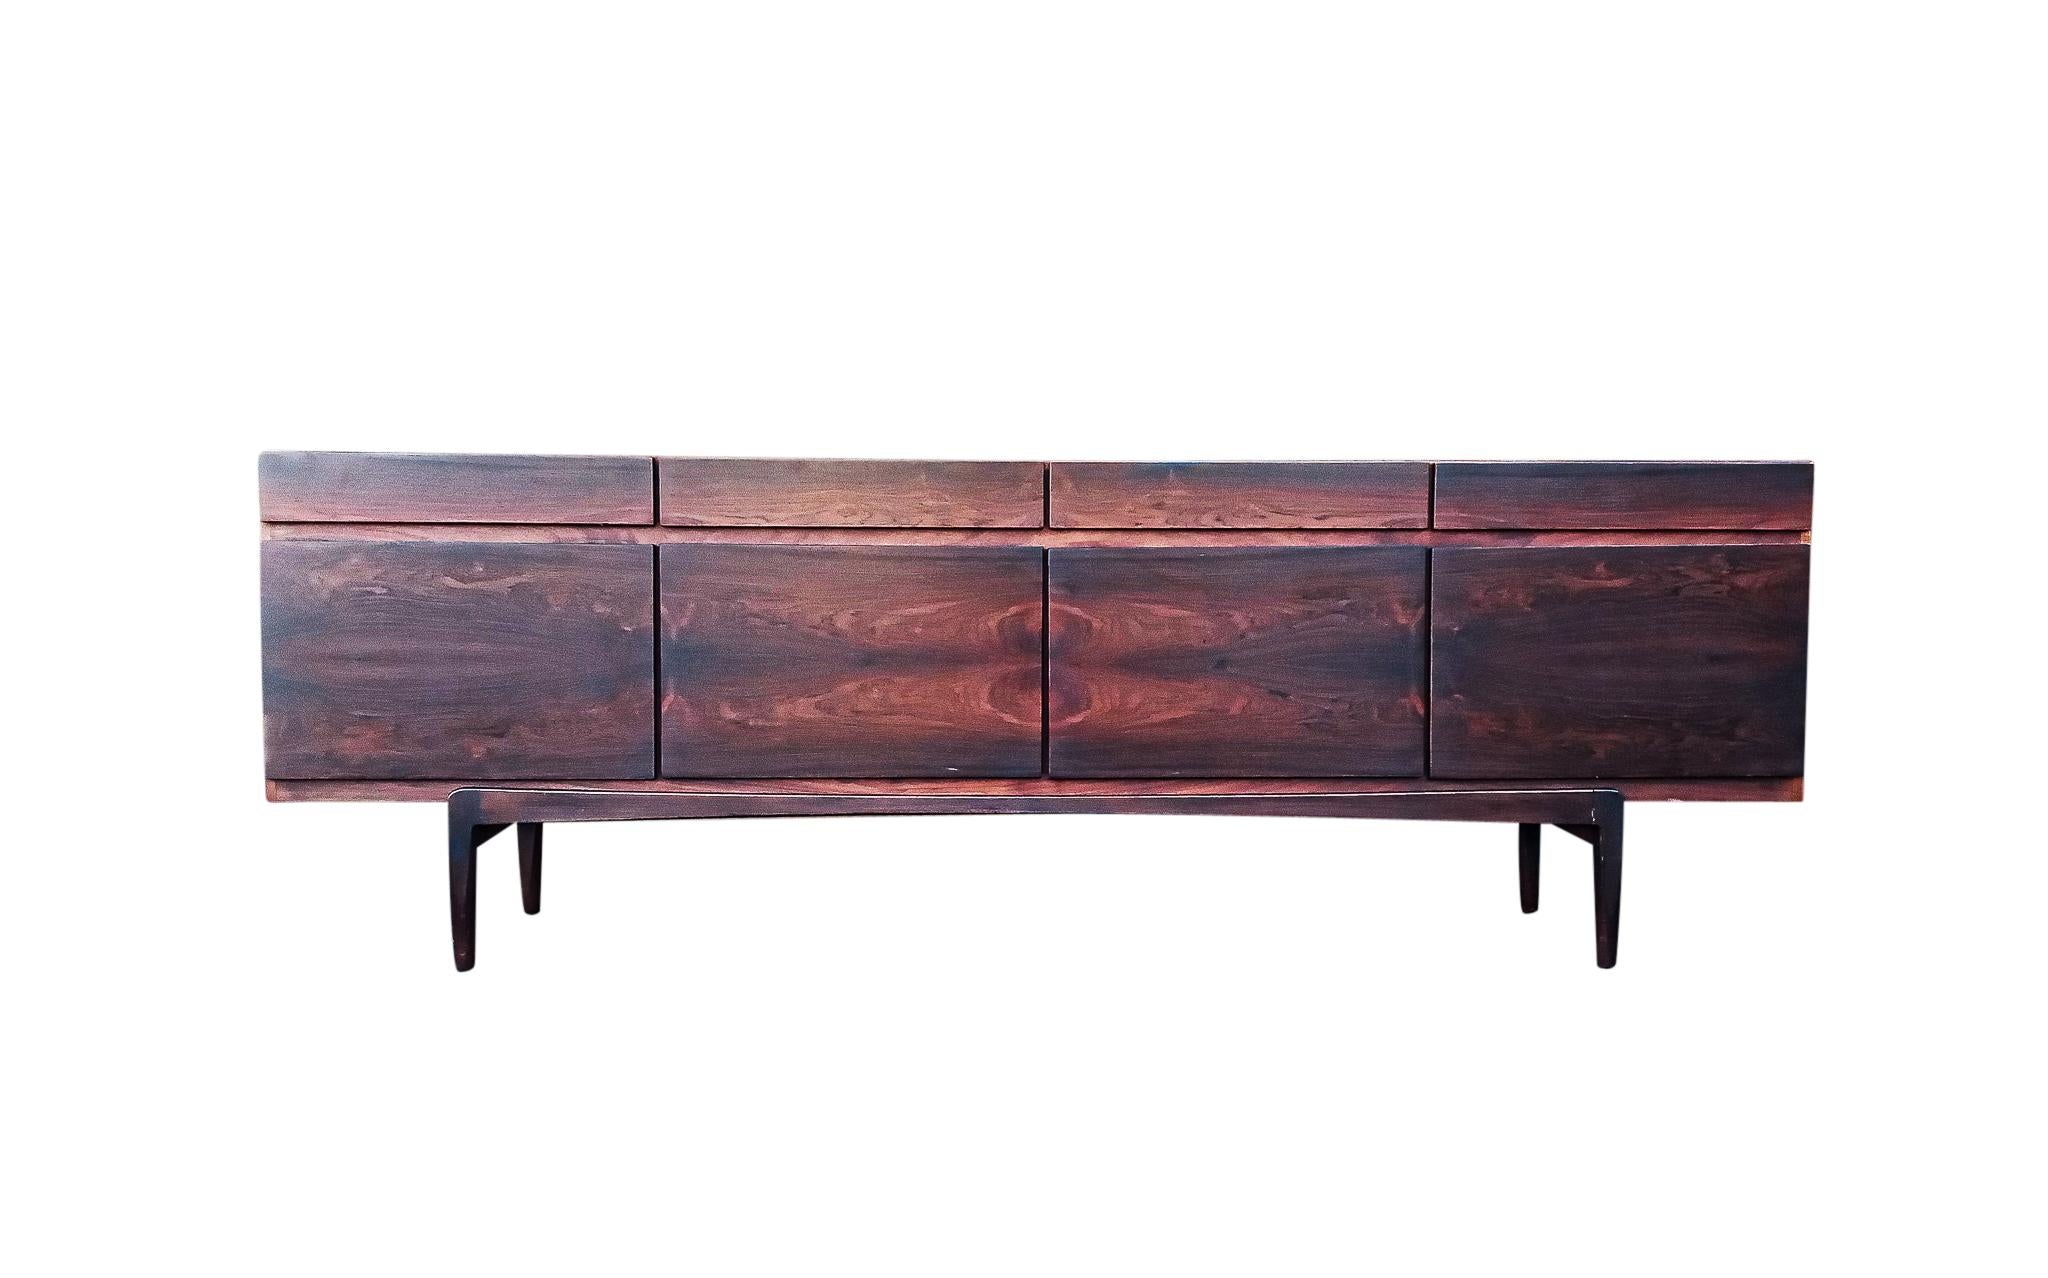 Fabulous and dramatic formal-scale bookmatched rosewood cabinet by legendary Danish designer Ib Kofod-Larsen. Ours features four drawers above four doors concealing five sliding shelves and one rosewood removable shelf and another two in glass, not